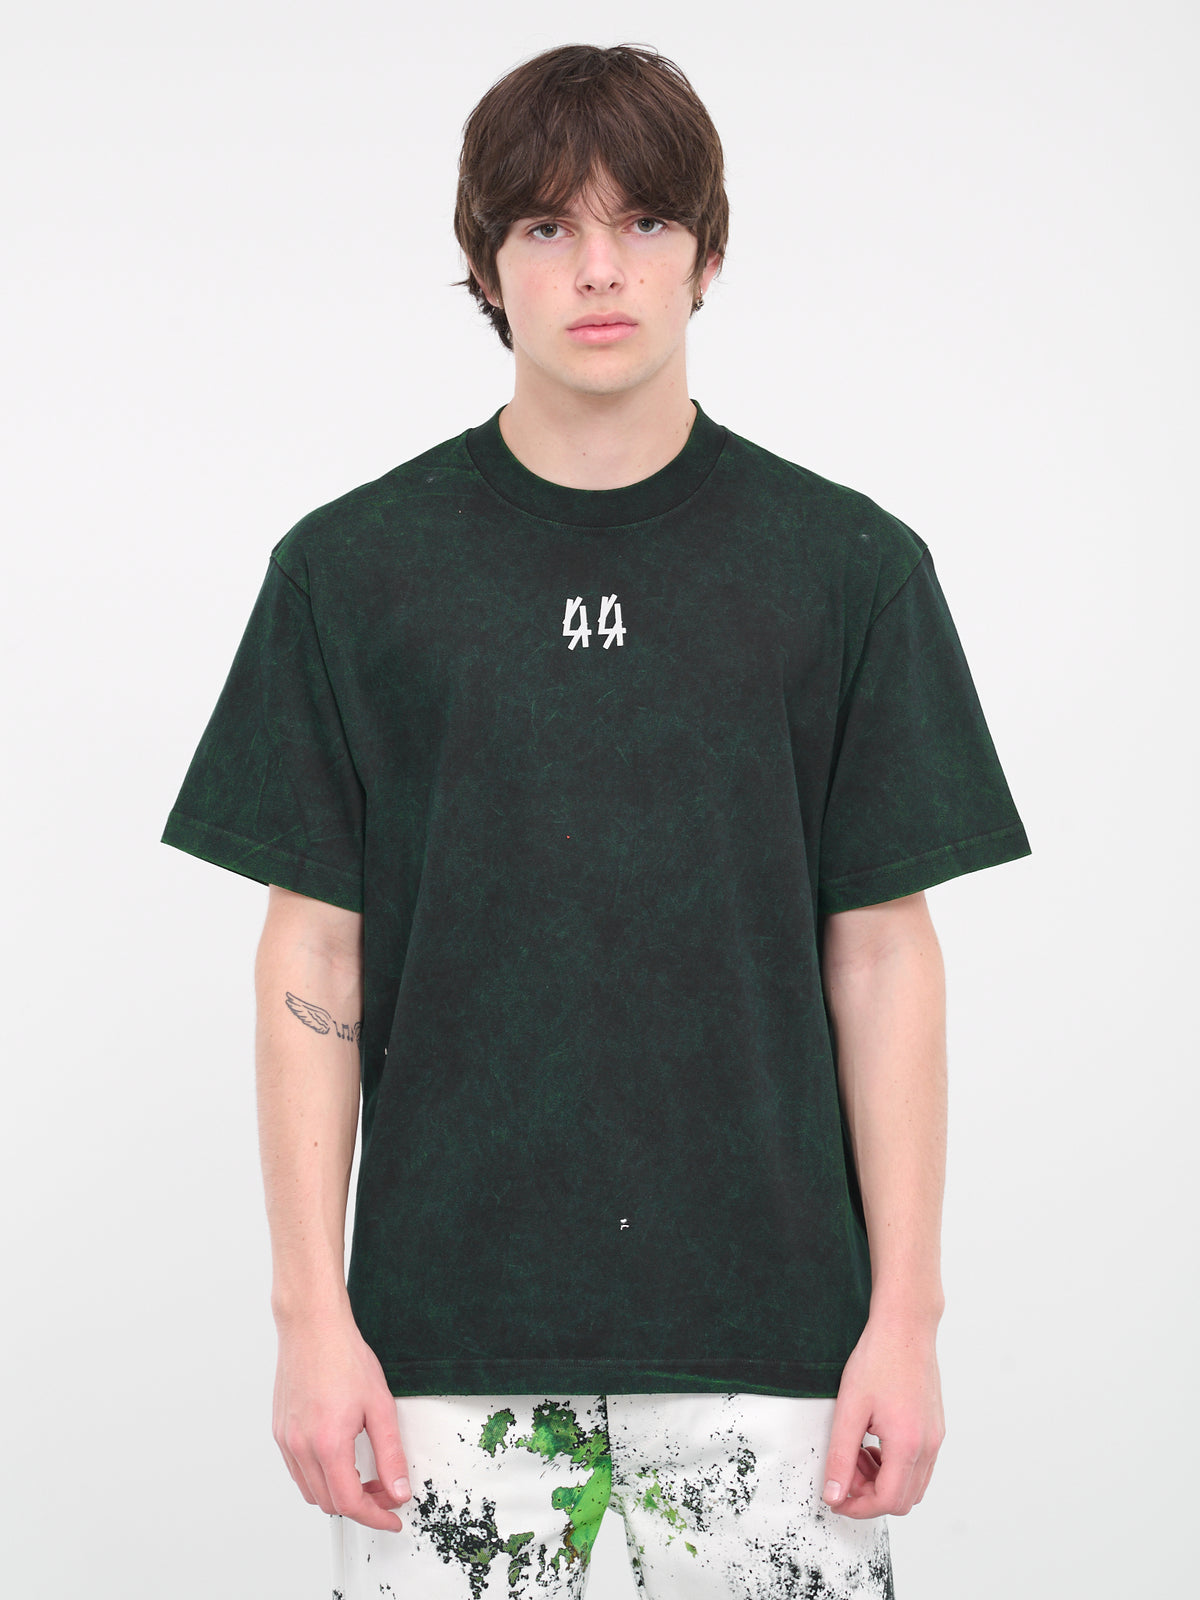 Group | Label SS24 - H.LORENZO Men Angeles for Los 44